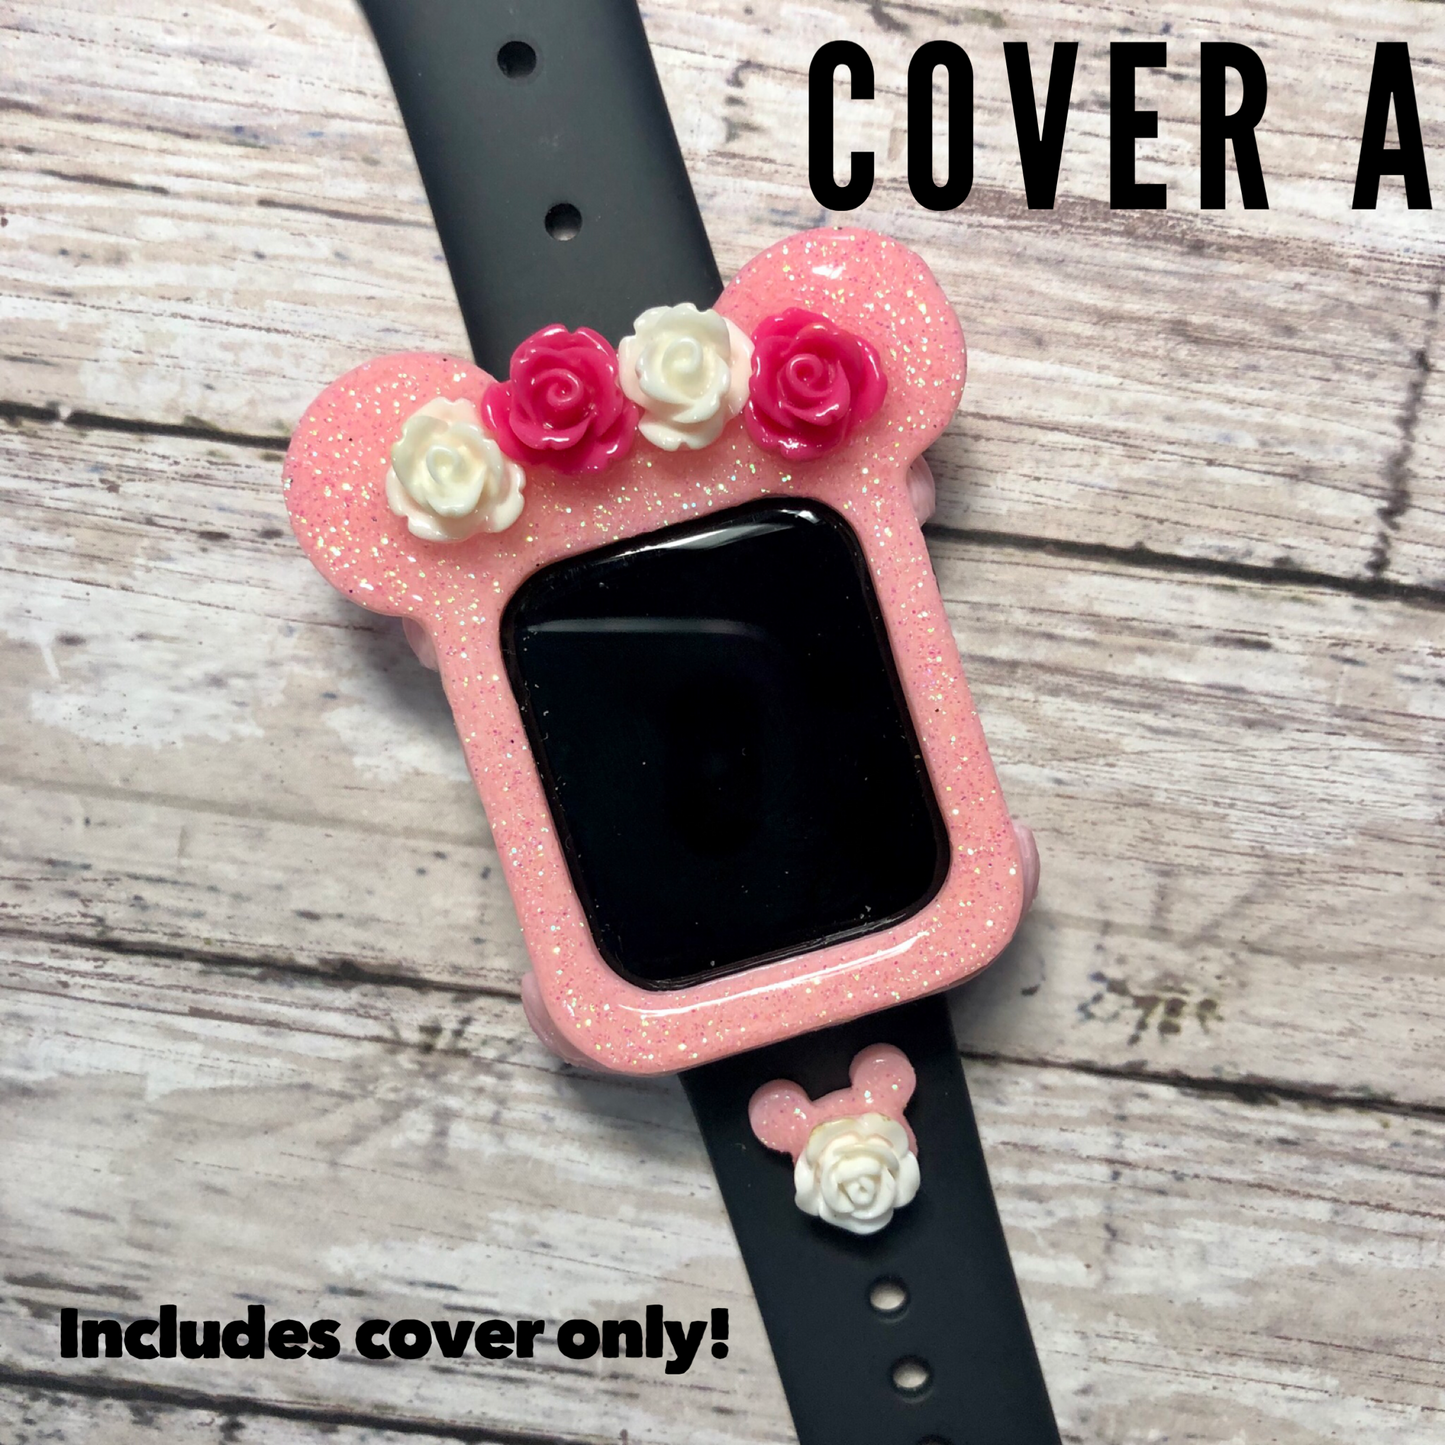 Flower Crown Mouse Watch Cover ONLY -- No Charm Floral